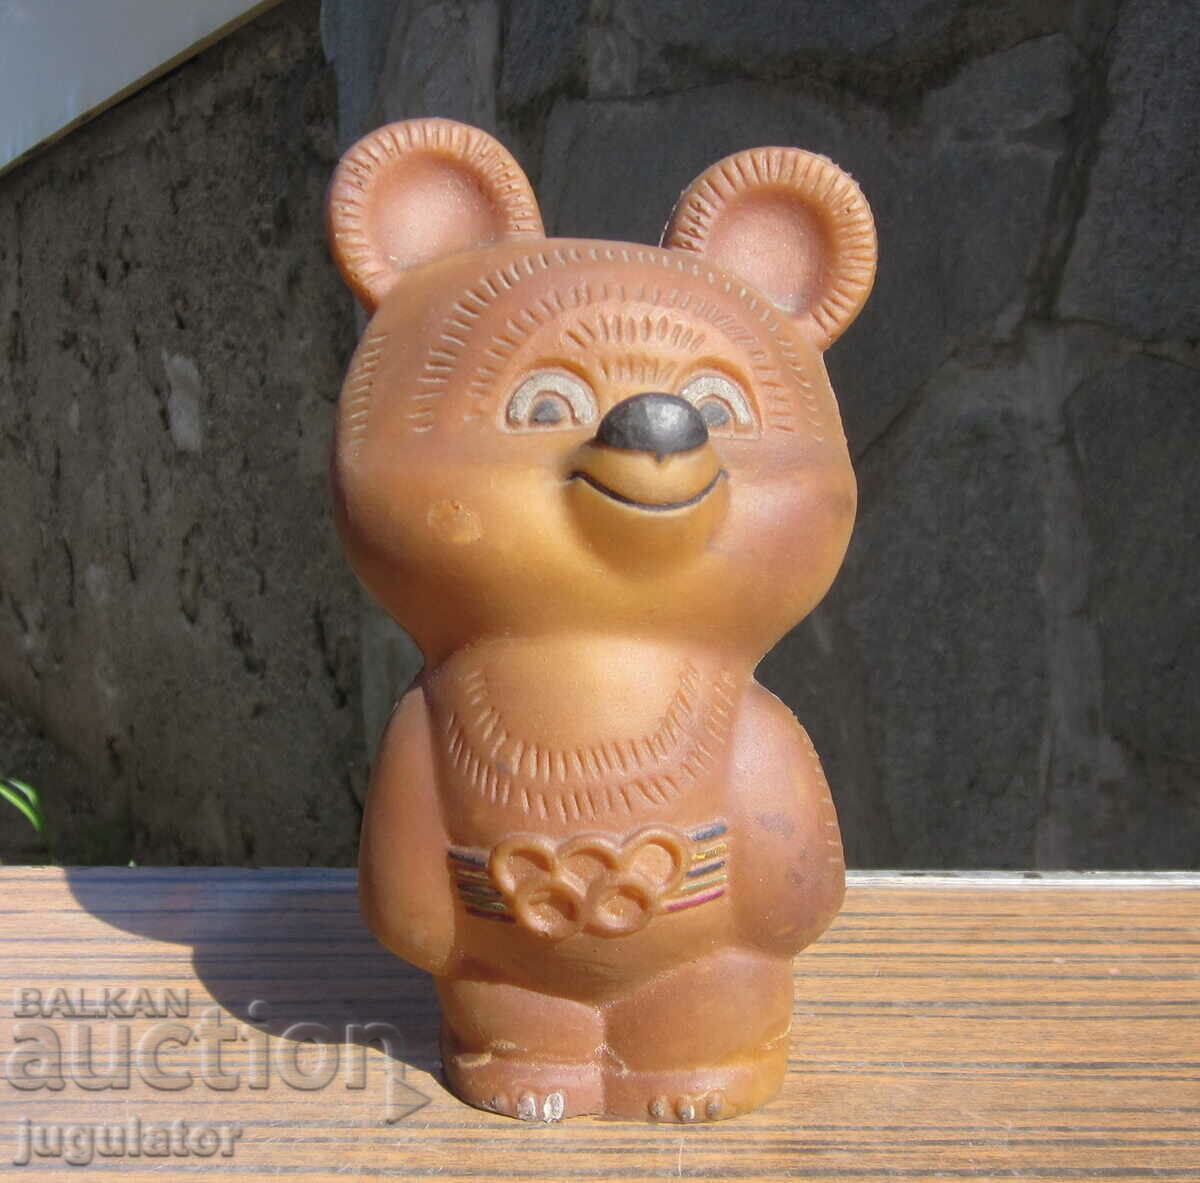 the bear Misha, an old Olympic toy Olympiad Moscow 1980